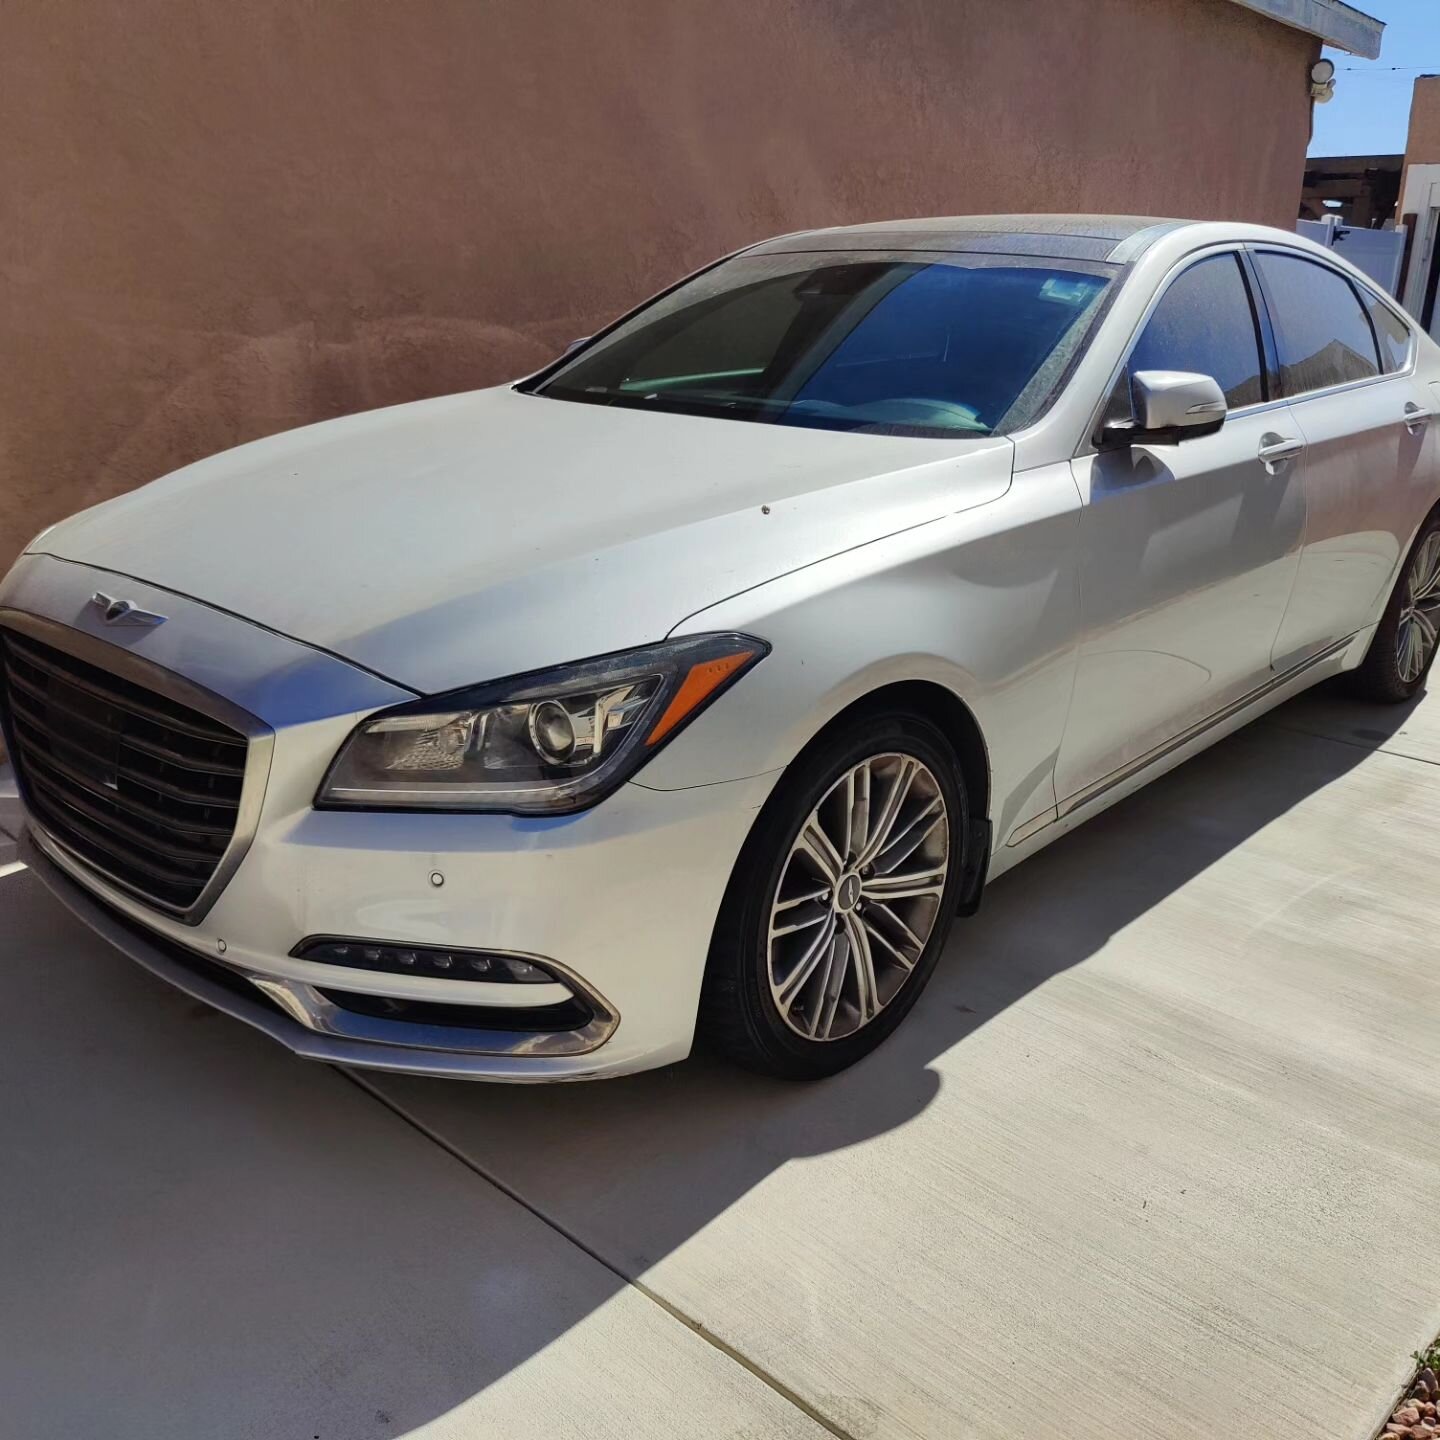 Basic Wash Package on a Genesis G80. Give your car the shine it deserves by booking your appointment with Geo's Mobile Auto Detailing! Book now!
.
.
.
.
.
.
.
.
.
 .
#detailing #carwash #genesisg80 #mobiledetailing #Mobilecarwash #longbeach #localbus